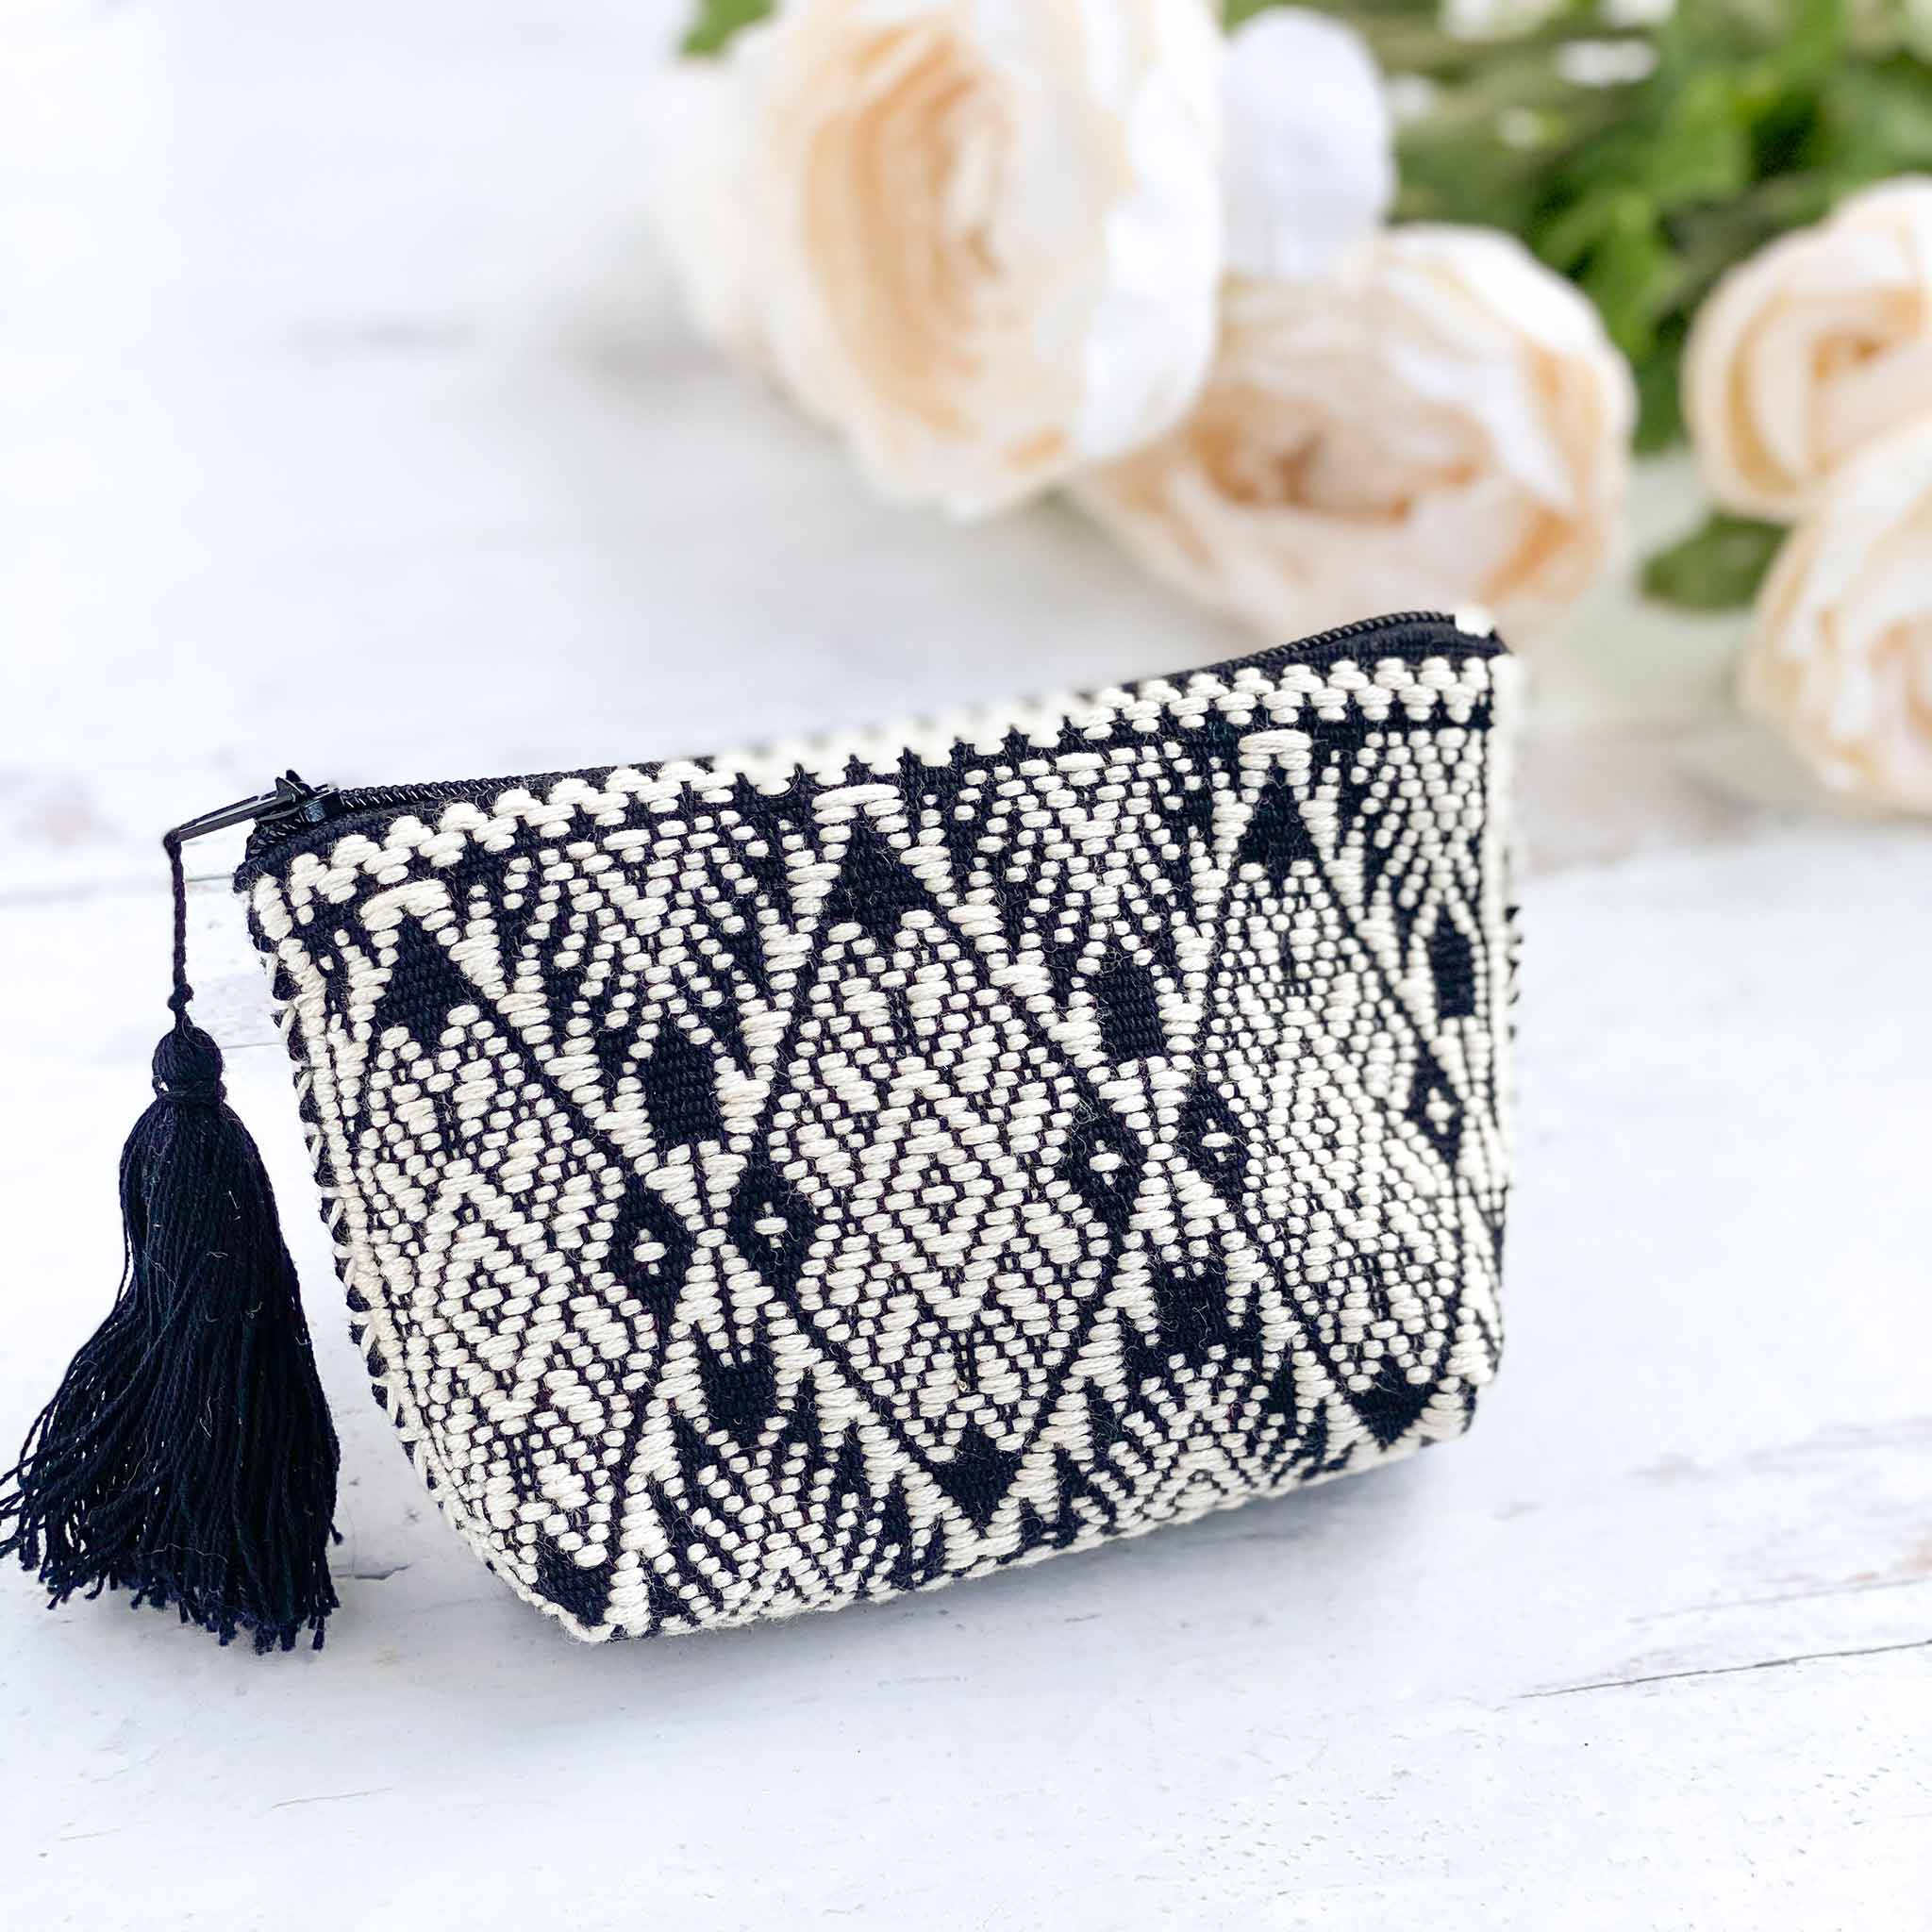 Handwoven Coin Purse with Tassel - Black